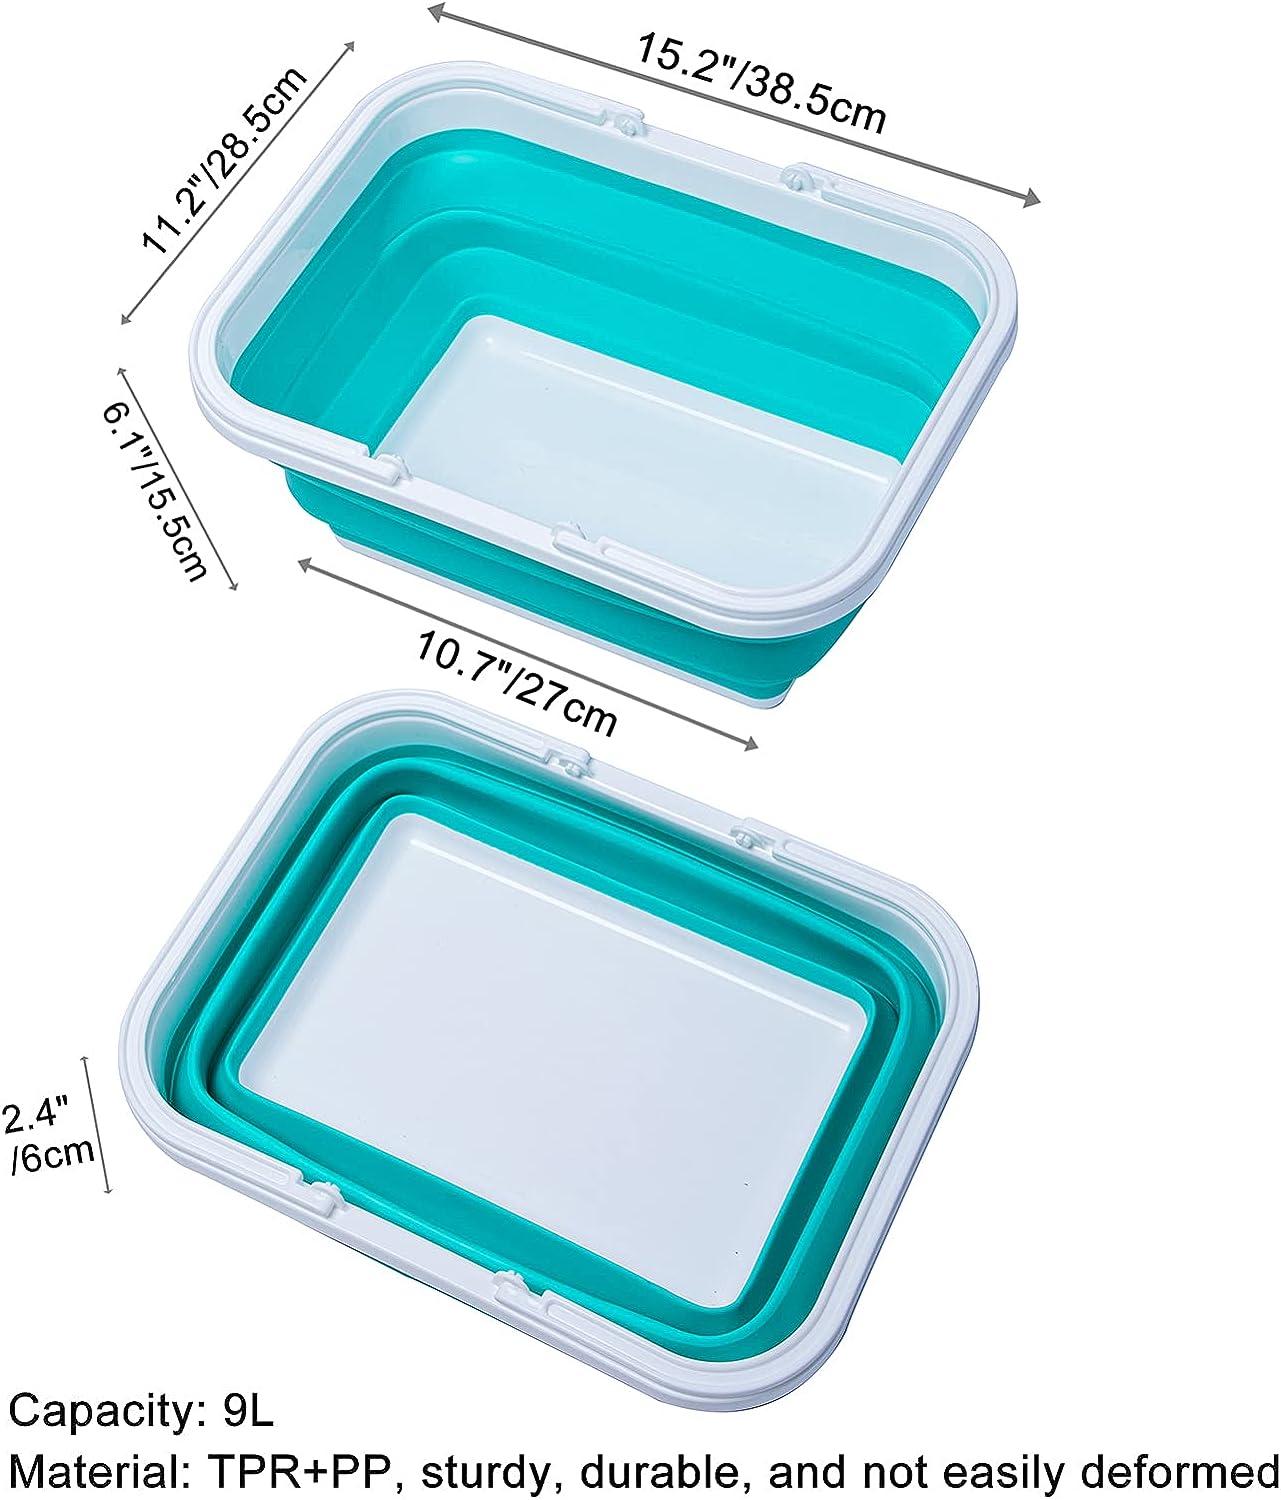 AUTODECO 2 Pack Collapsible Sink Gray/Blue/Green with Handle Towel, 2.37  Gal / 9L Foldable Wash Basin for Washing Dishes, Camping, Hiking and Home  Blue and Blue